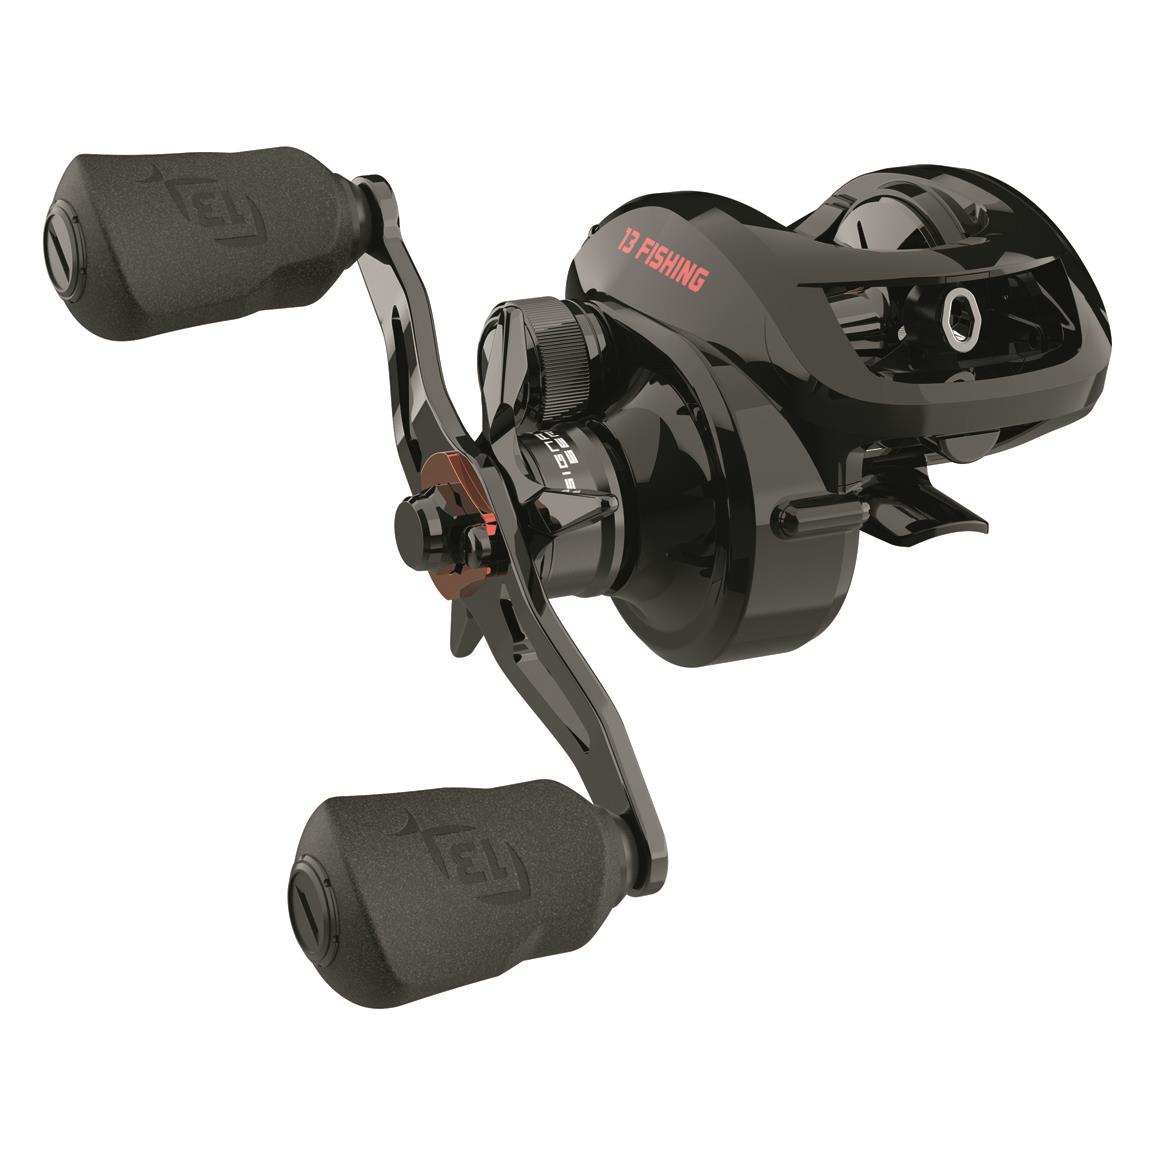 Lew's Speed Spool LFS Baitcasting Reel, 8.3:1 Gear Ratio, Right Hand -  732897, Baitcasting Reels at Sportsman's Guide